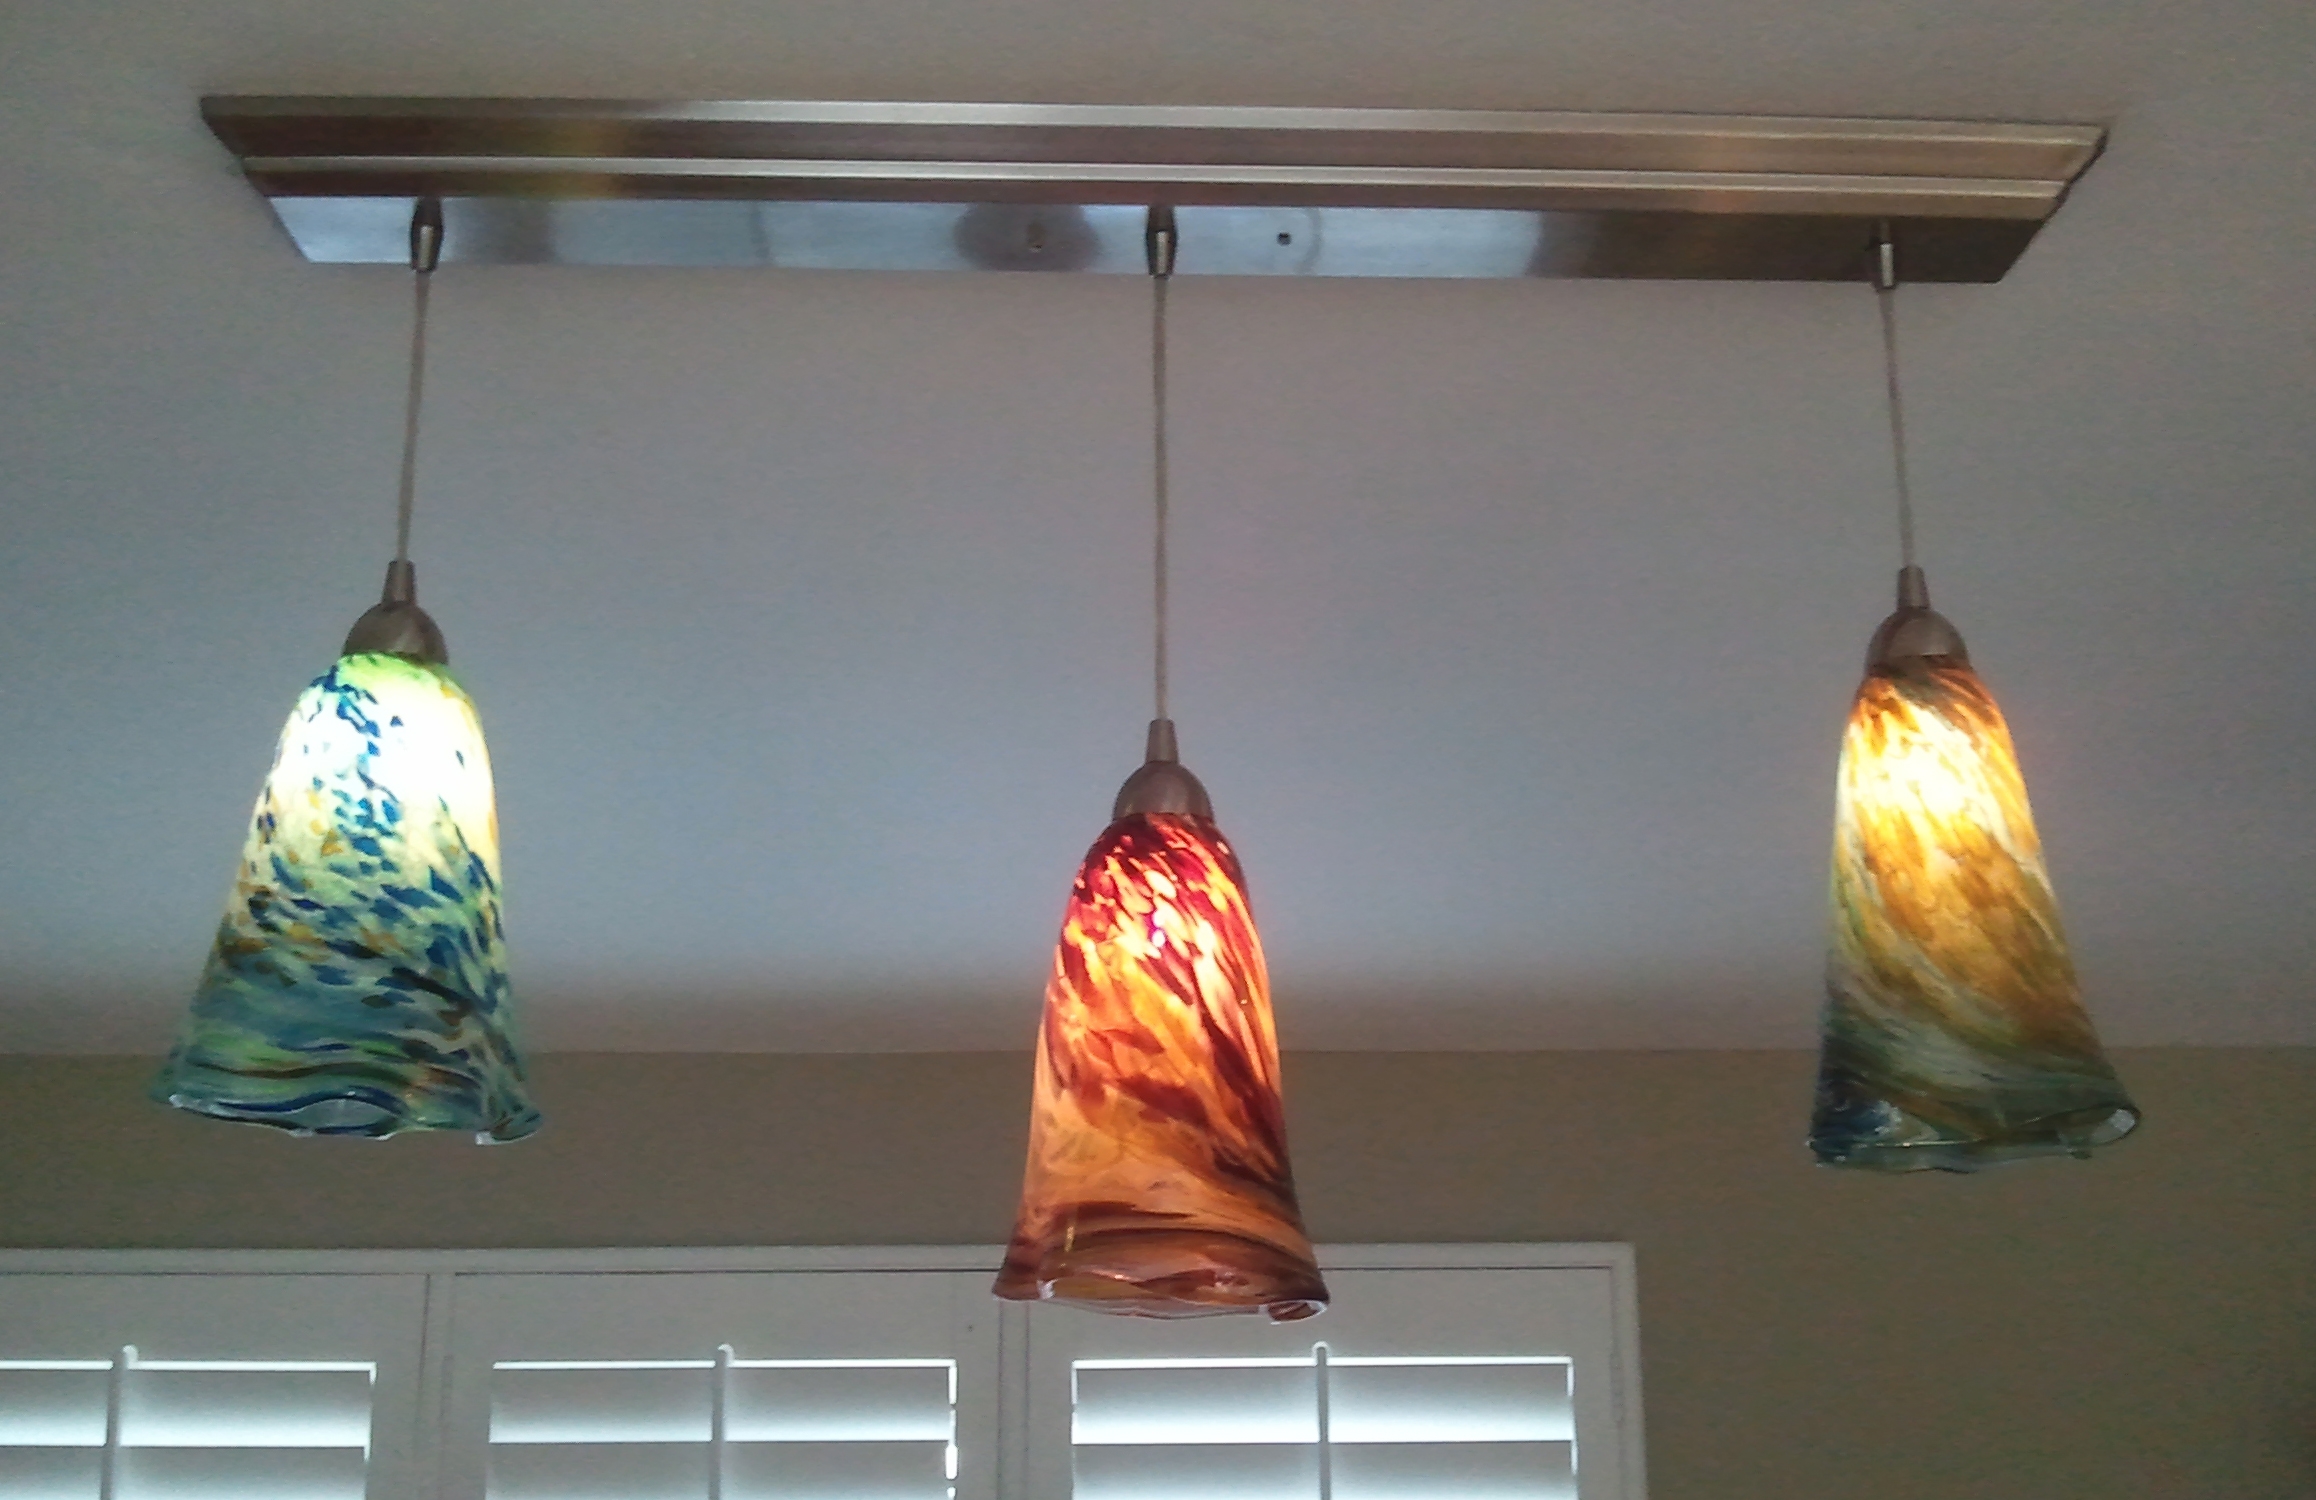 Light Shades For Ceiling Lights2316 X 1500